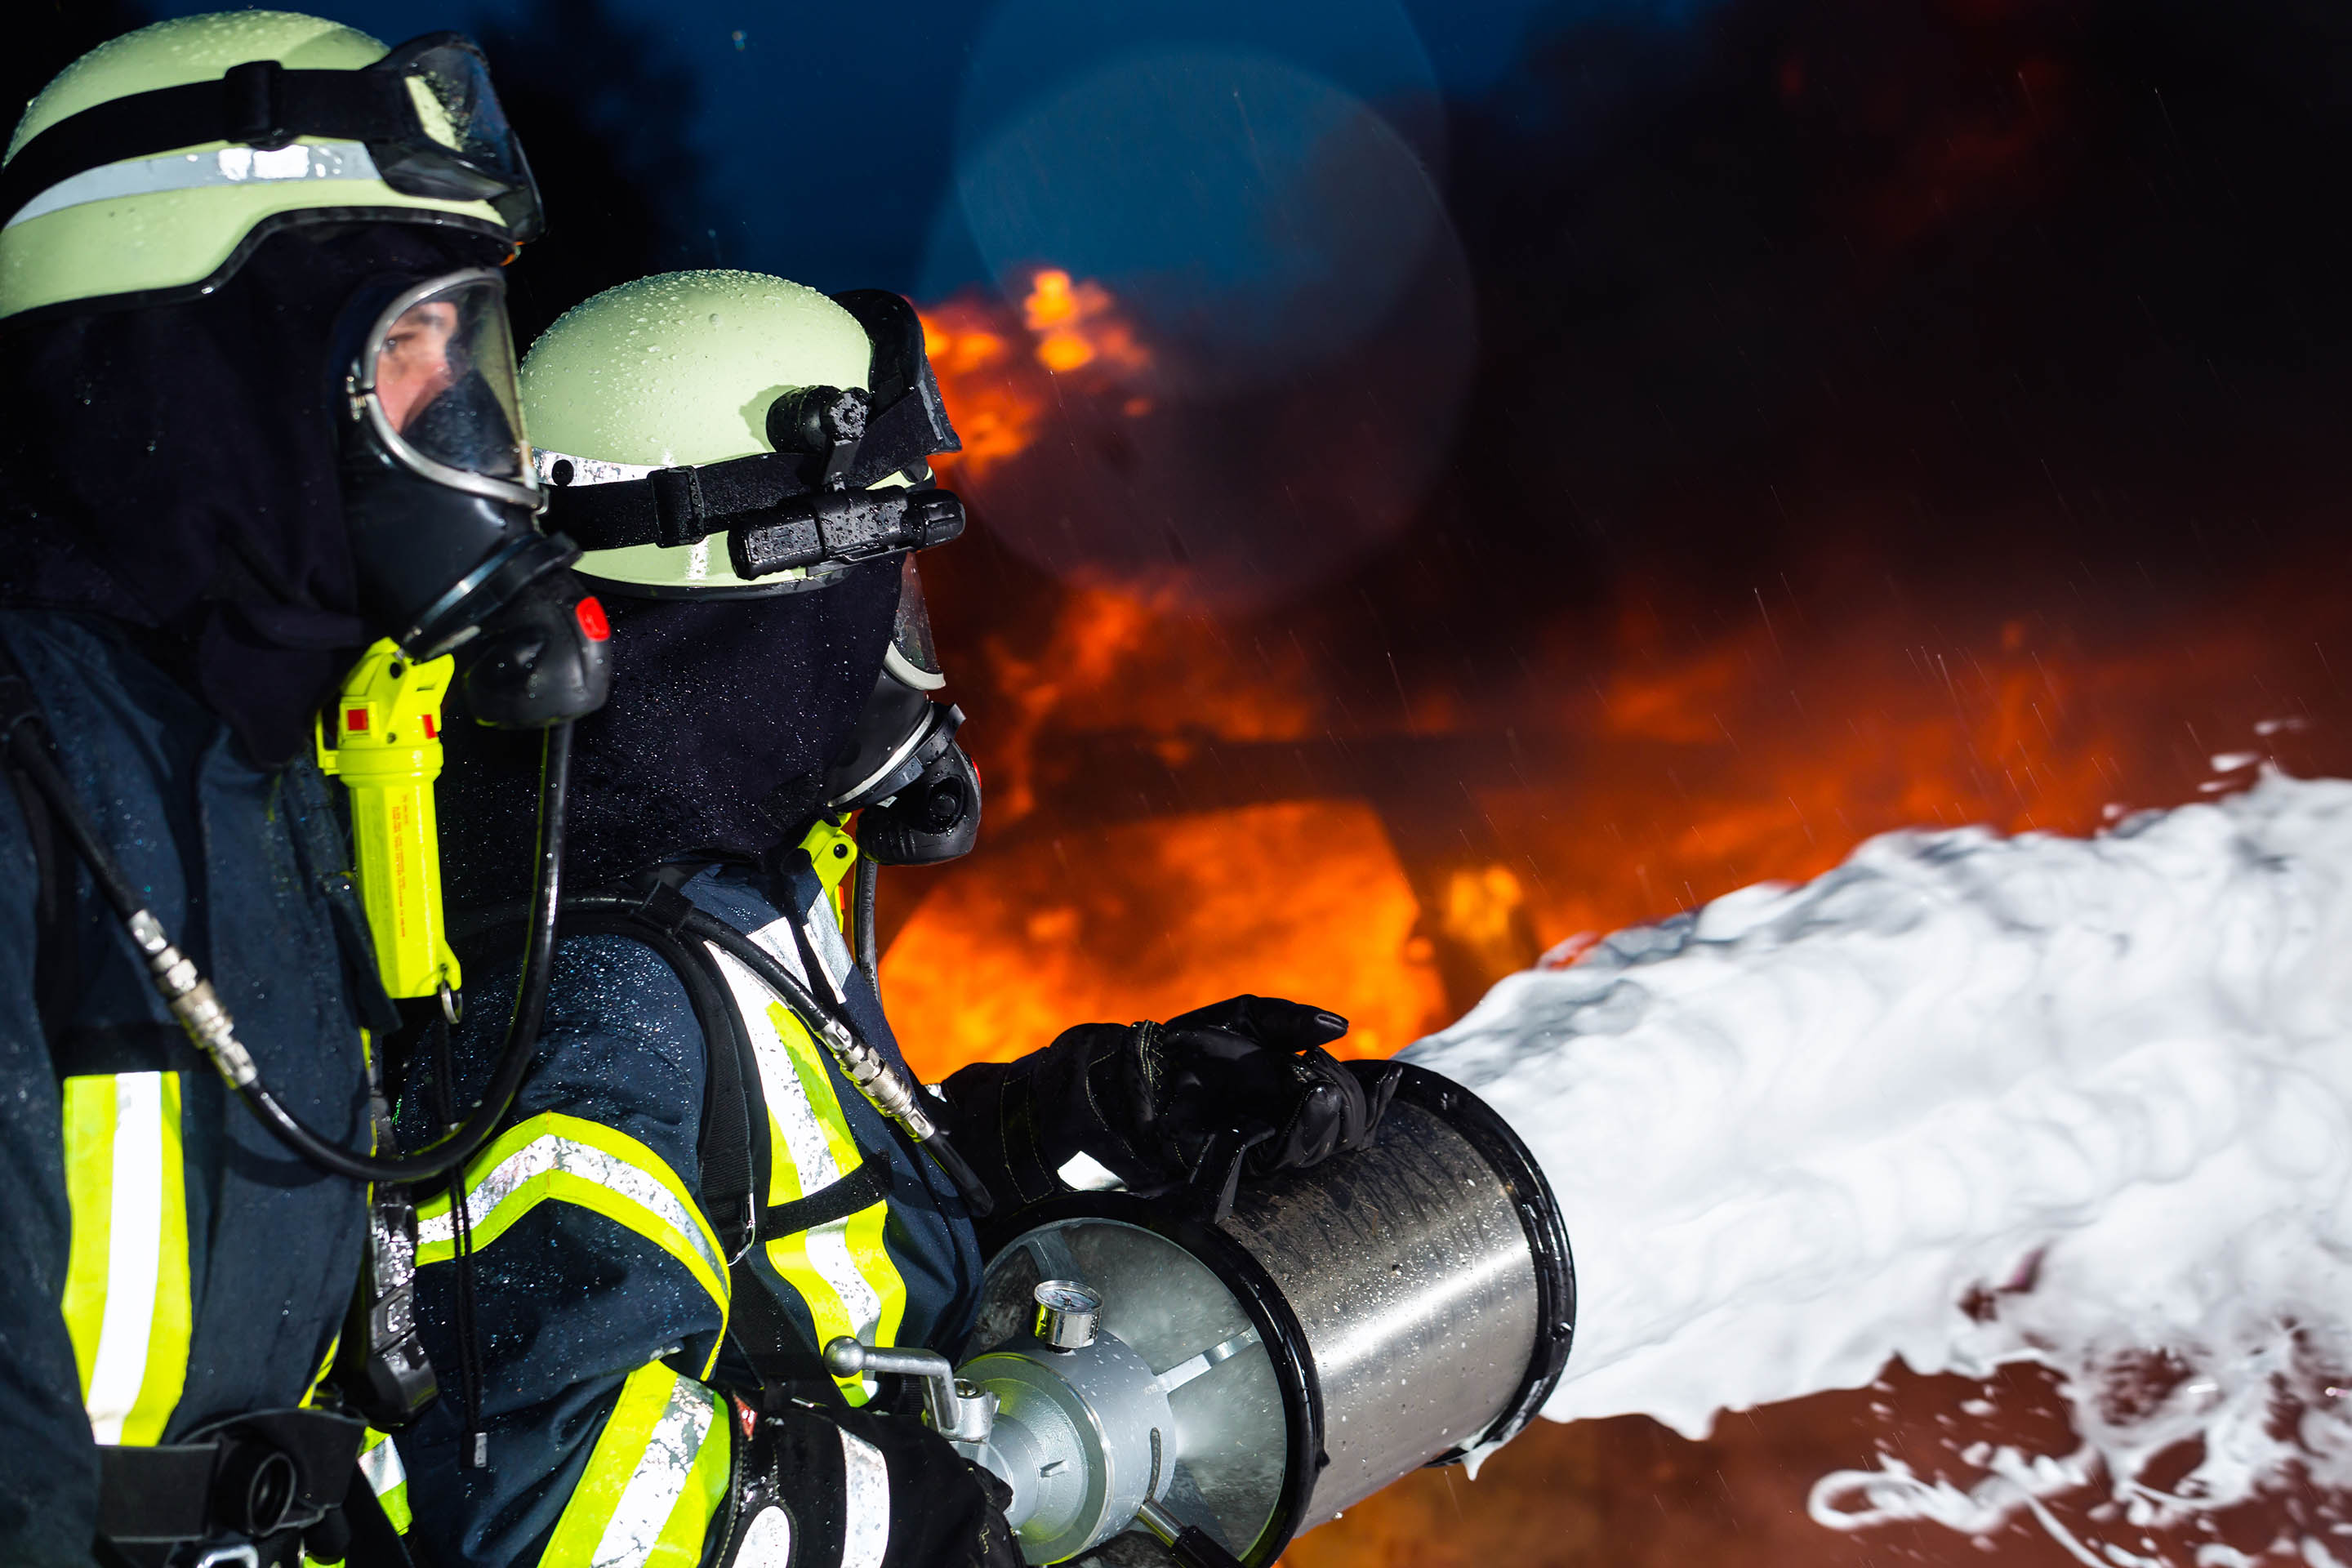 Volunteer Firefighters Have Higher Levels of ‘Forever Chemicals’